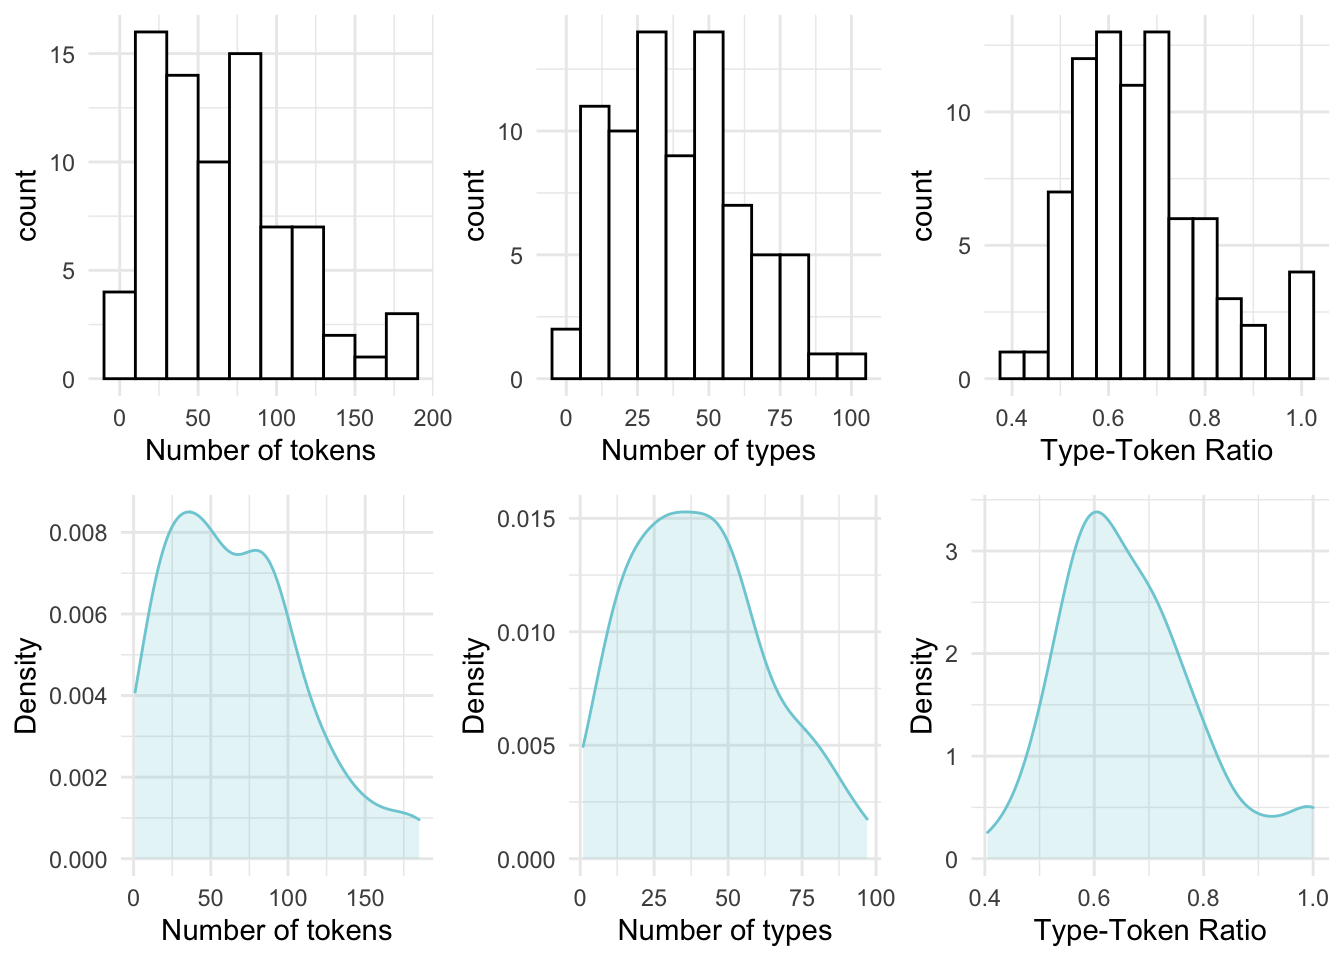 Histograms and density plots for the continuous variables in the BELC dataset.